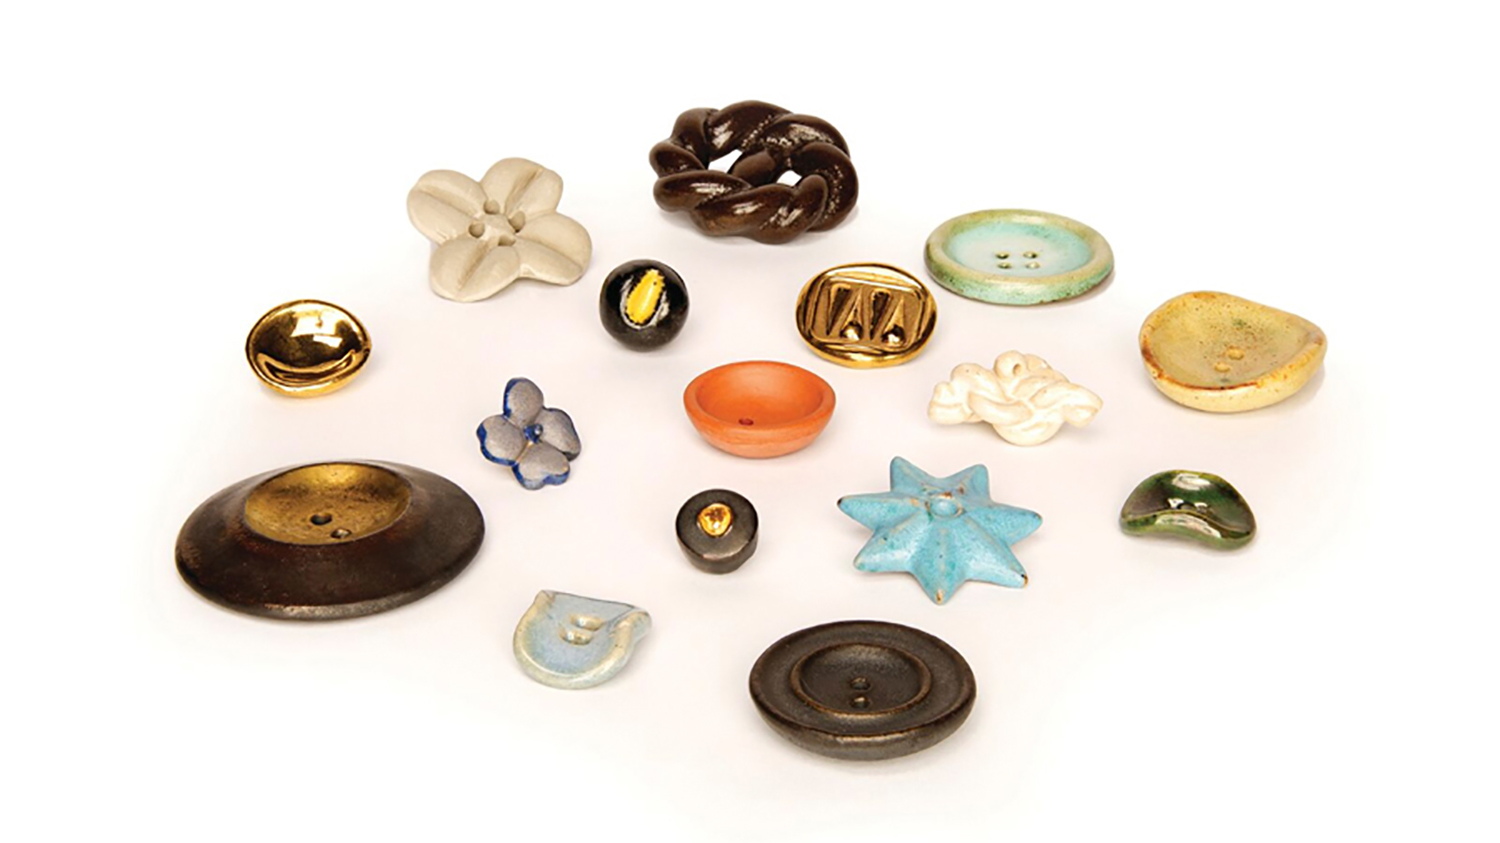   Buttons   by Lucie Rie  